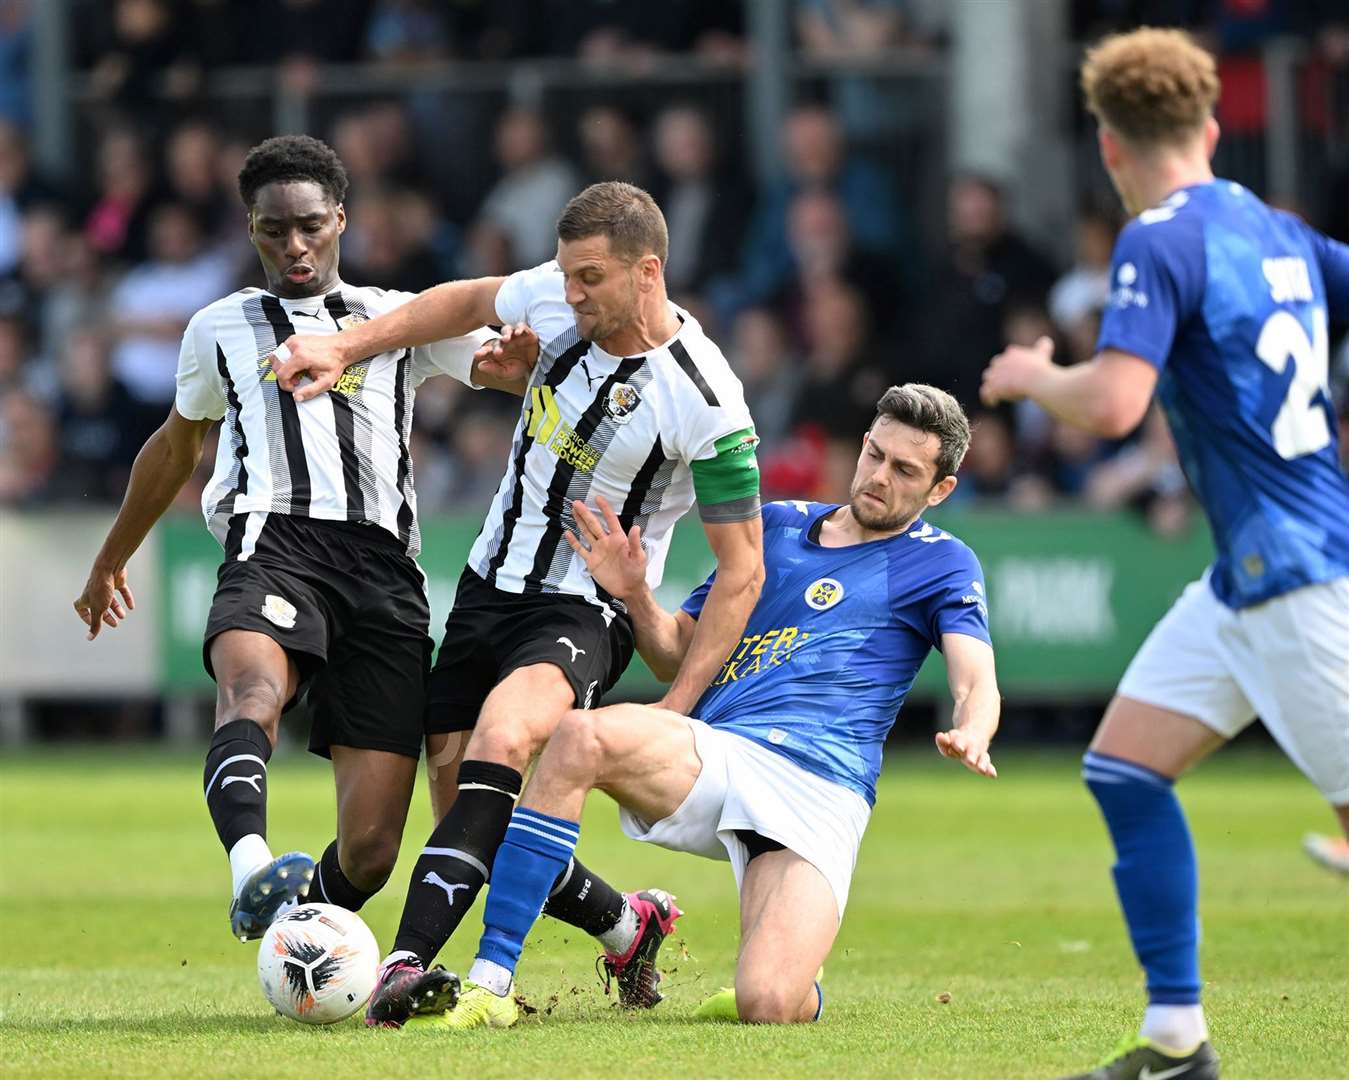 Dartford reached the National League South Play-off Semi-Finals last year. Picture: Keith Gillard